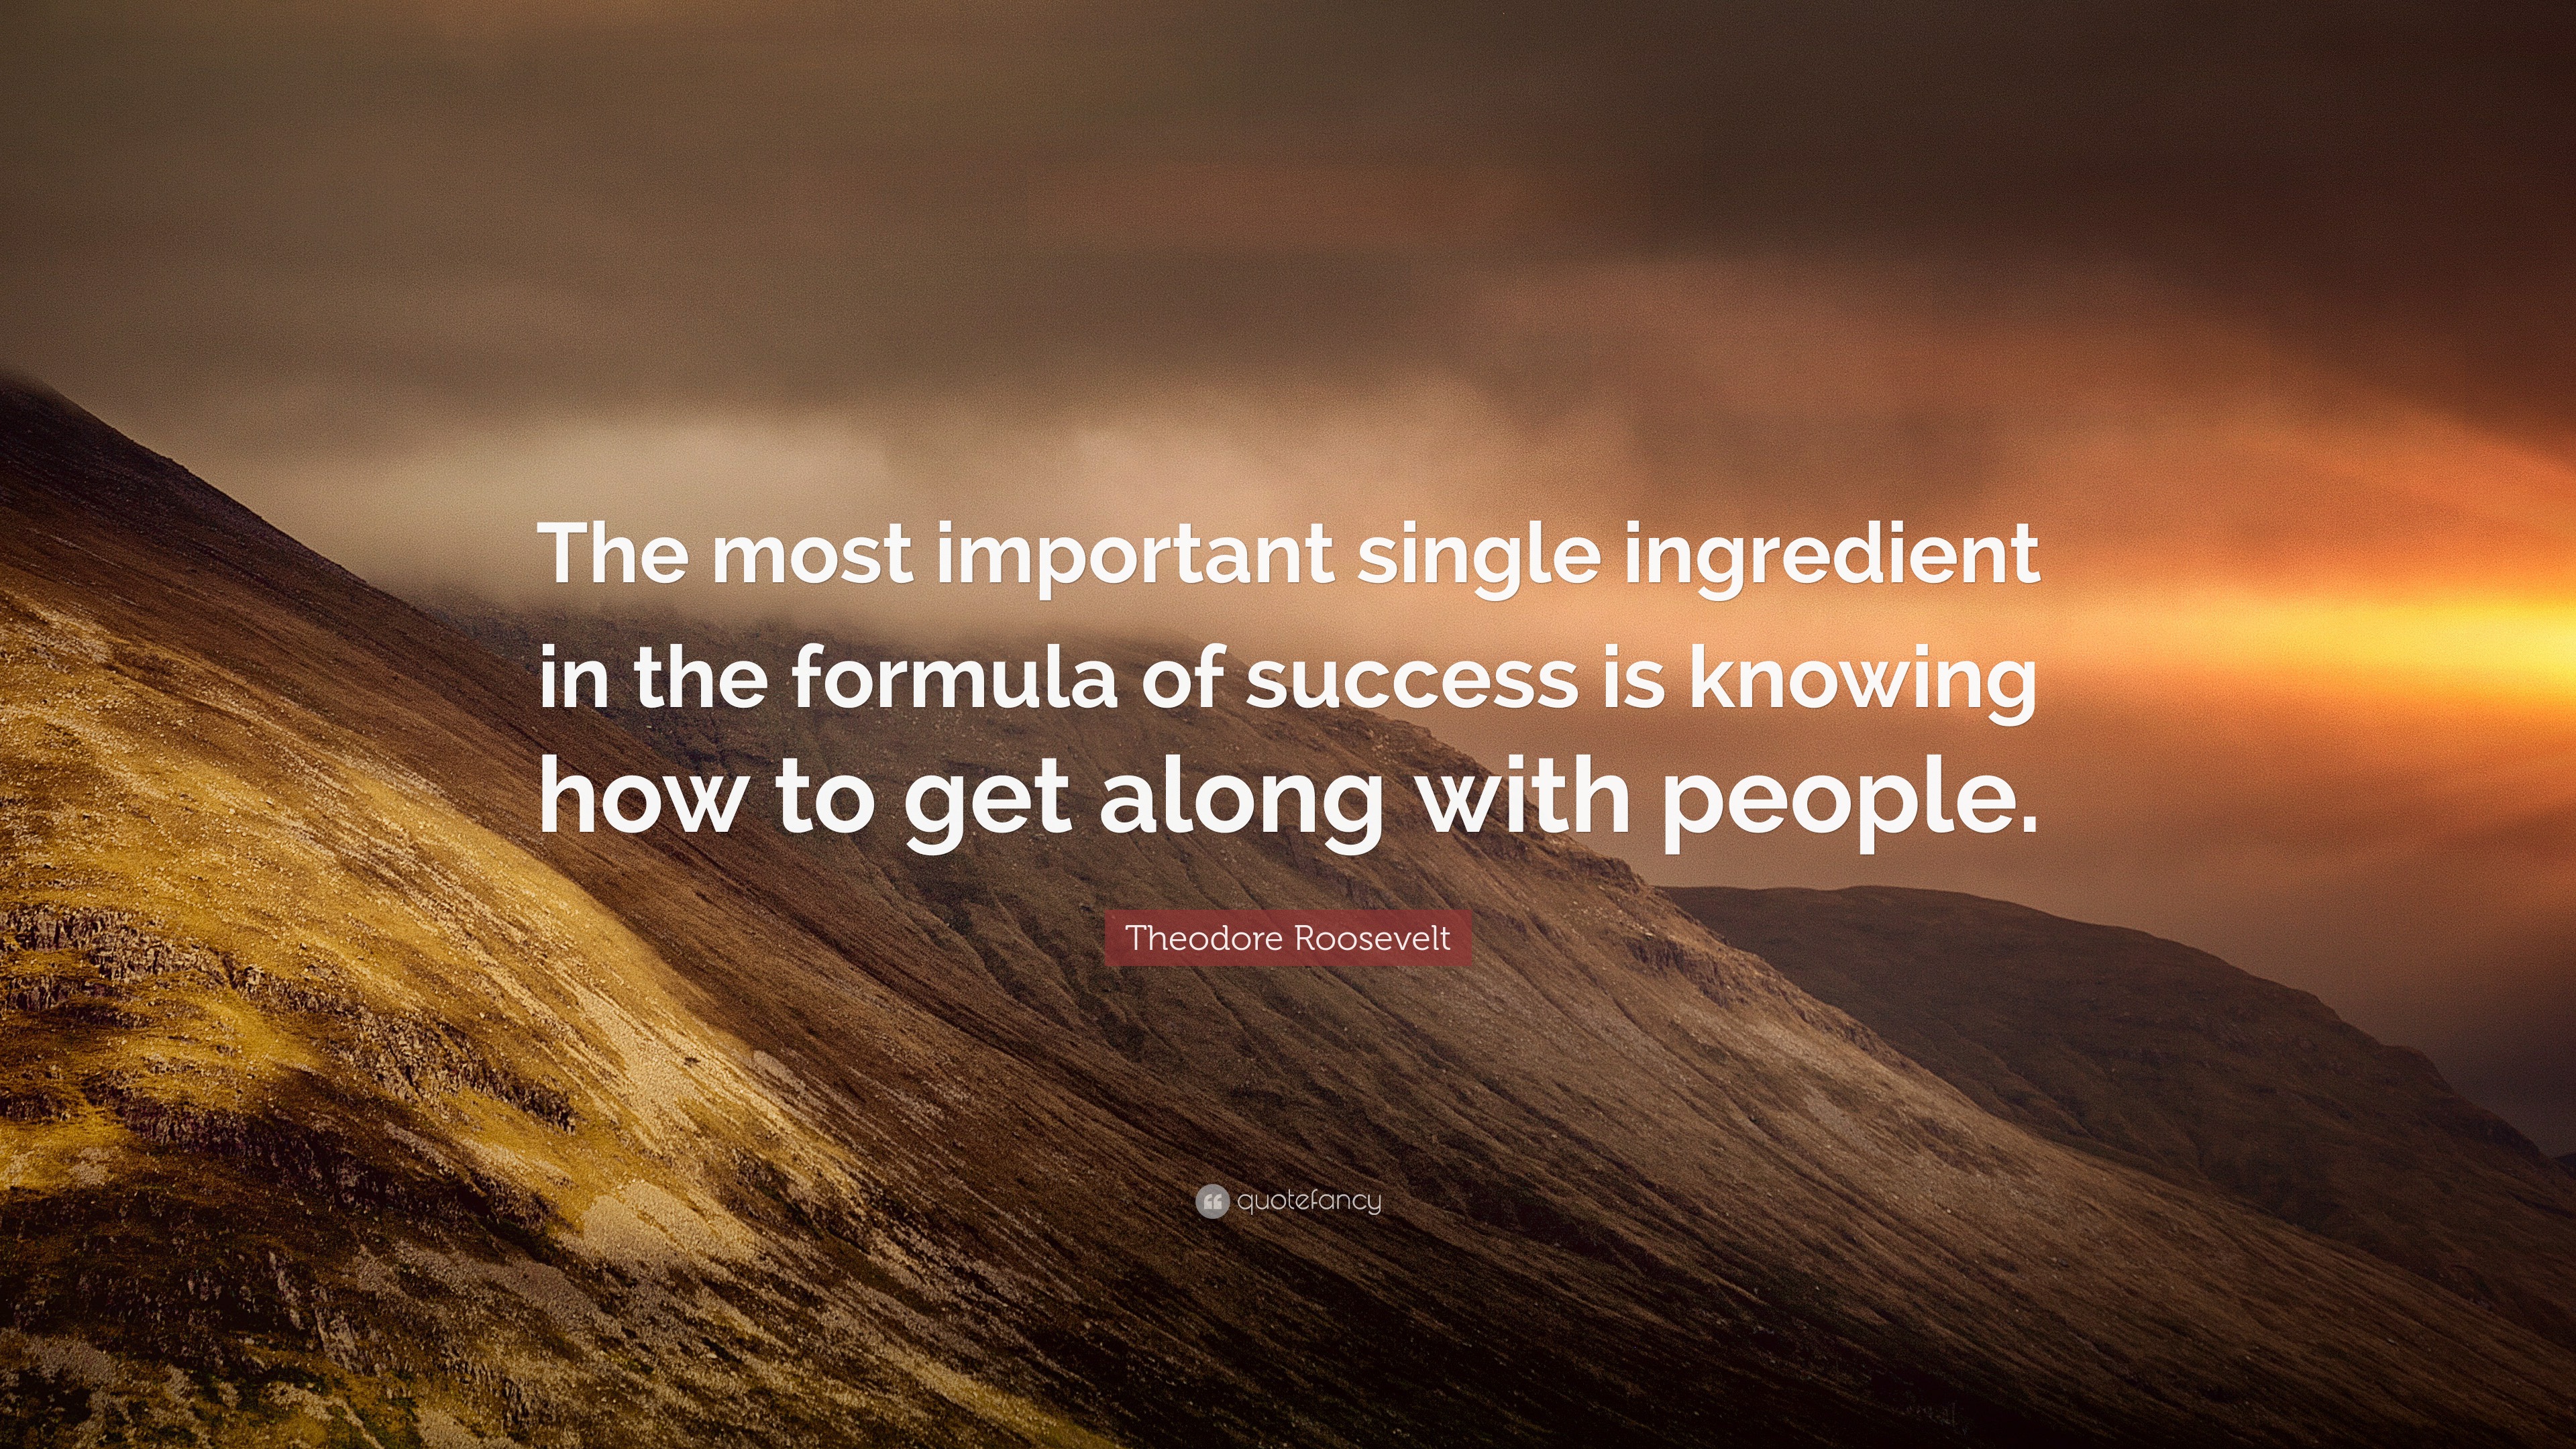 Theodore Roosevelt Quote: “The most important single ingredient in the